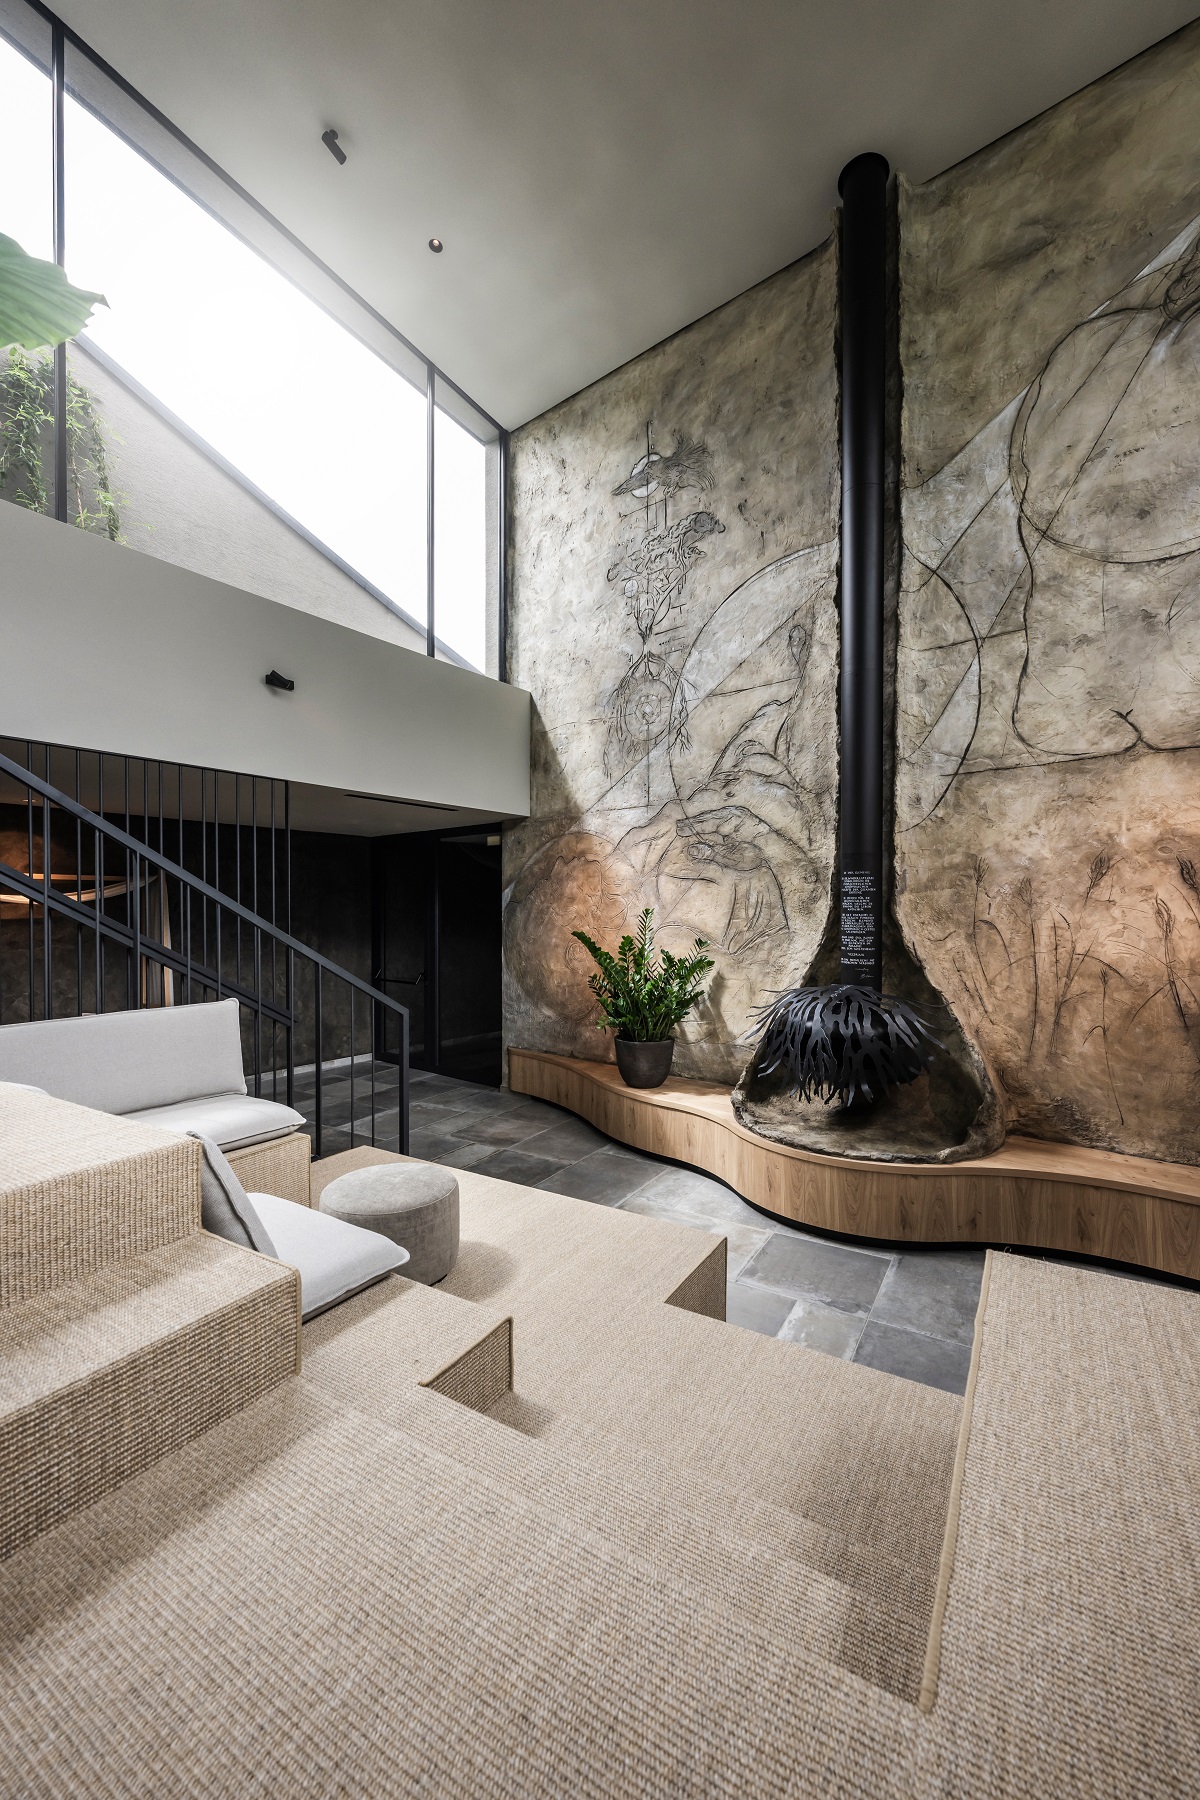 textured concrete backwall behind suspended fireplace in stepped central seating area